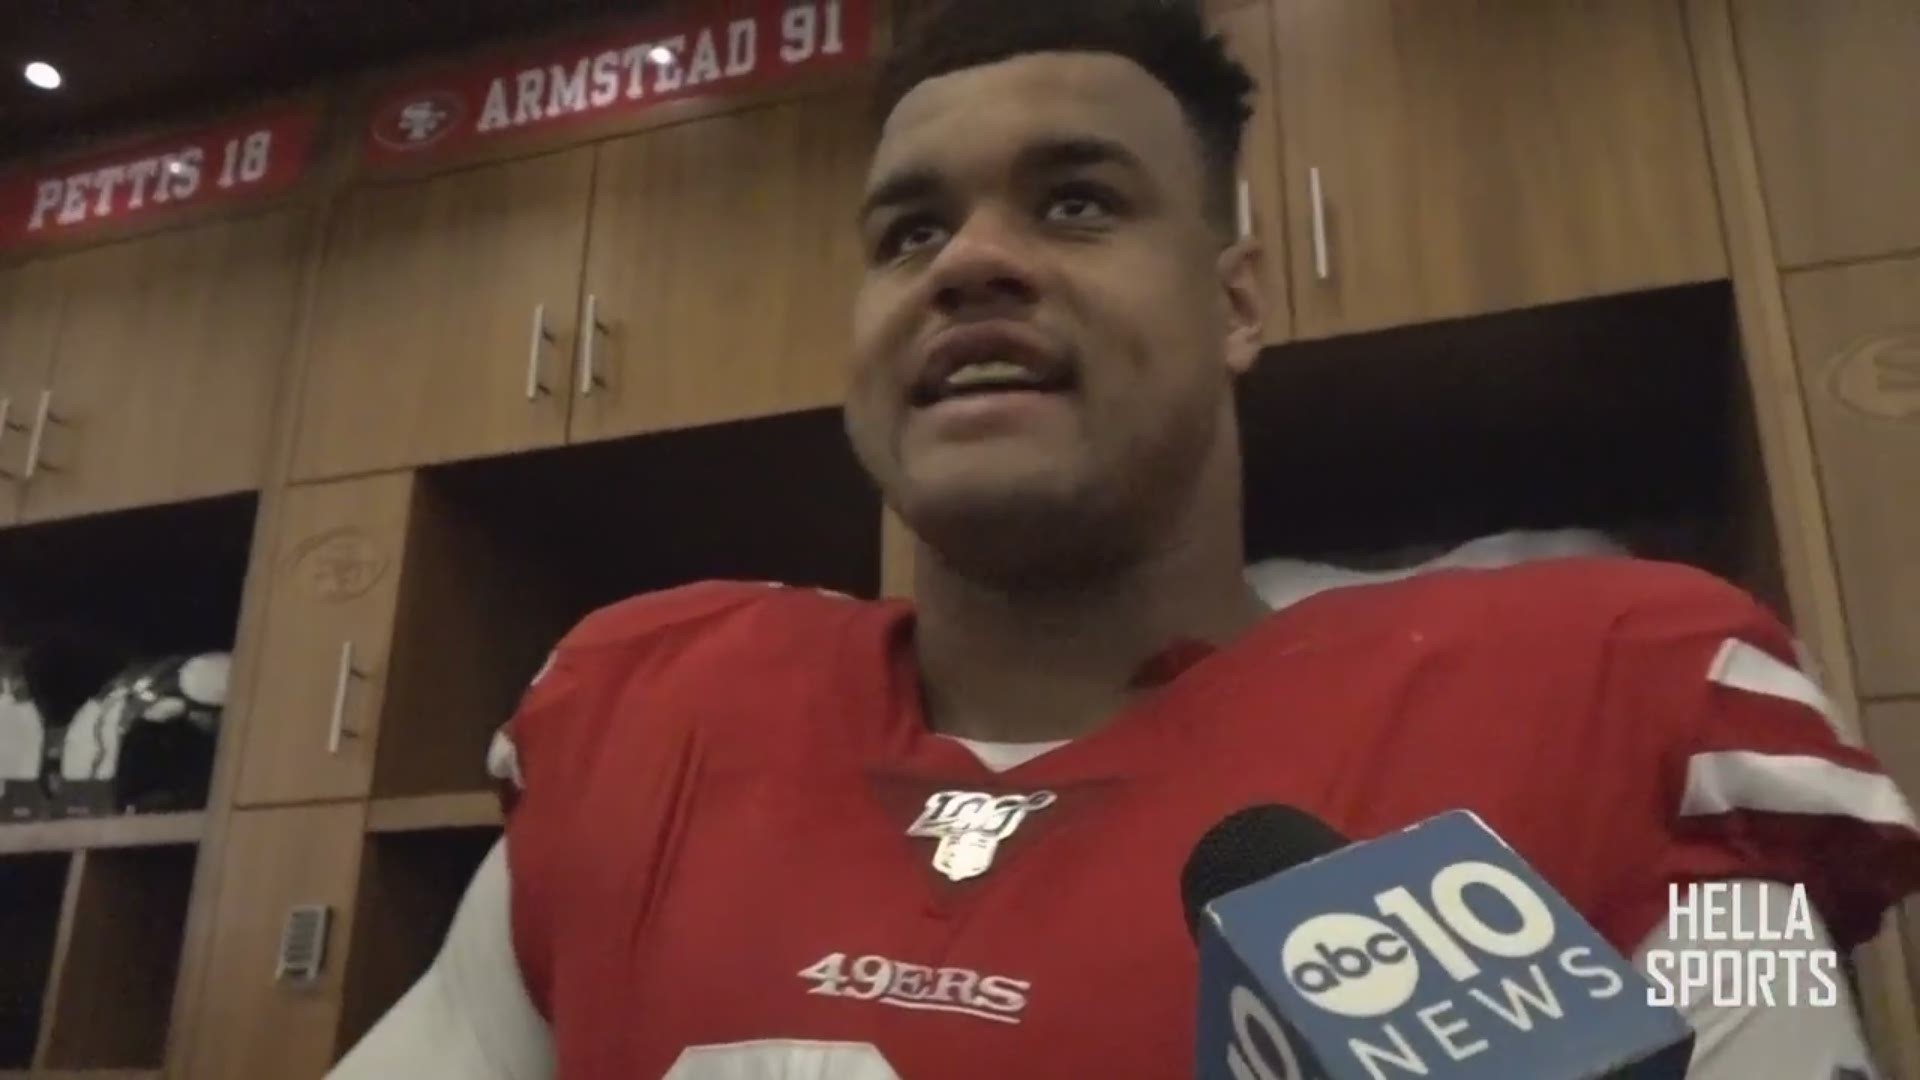 Sacramento's Arik Armstead celebrates his NFC Championship and reflects on his best season in San Francisco